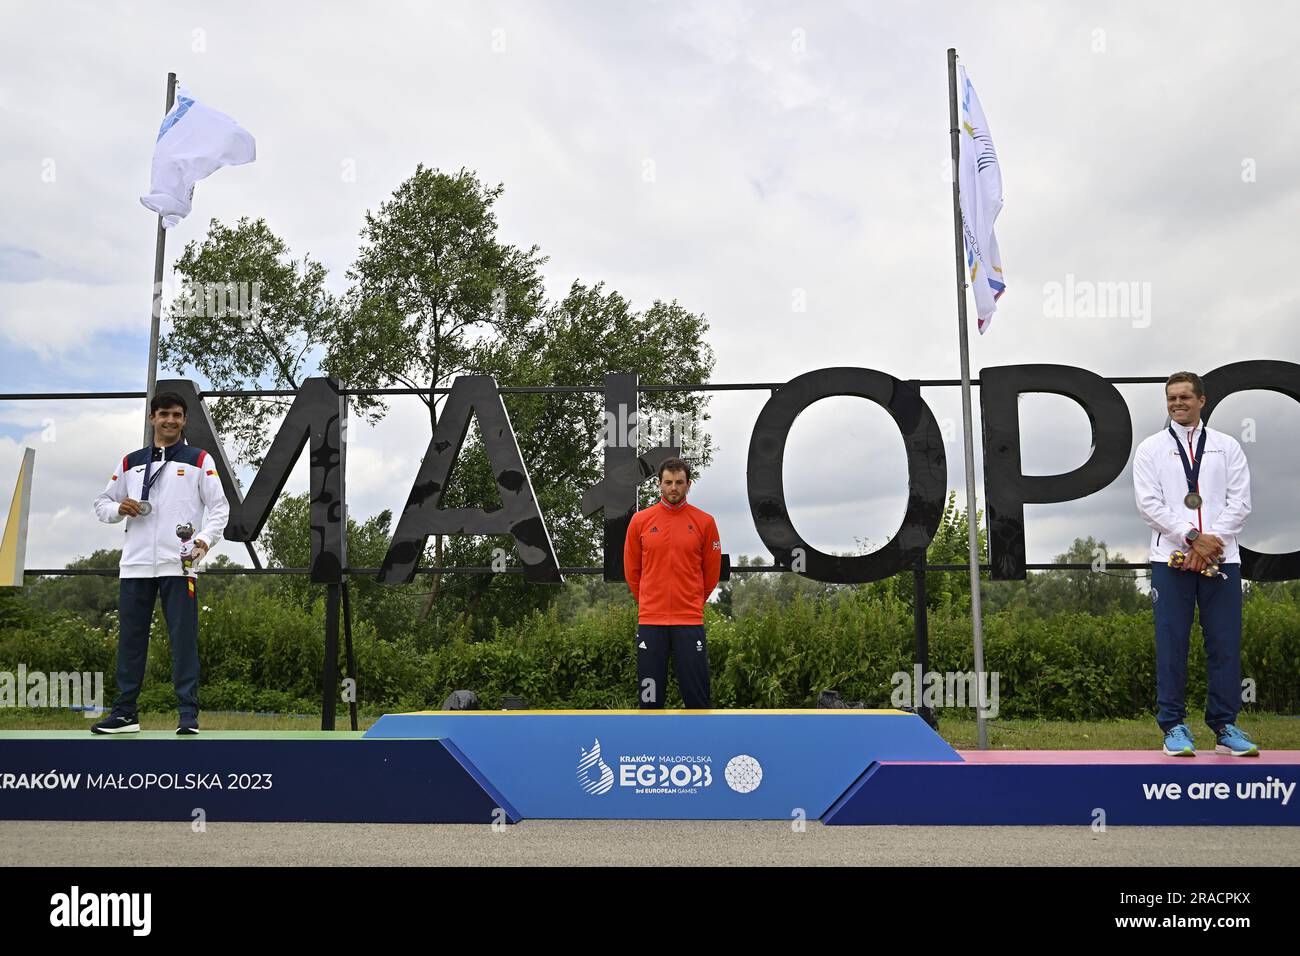 Krakow, Poland. 02nd July, 2023. Canoe Slalom. 2023 European Games. Kolna Sports Centre. Krakow. (l to r) Miquel Trave (ESP, Silver), Ryan Westley (GBR, Gold) and Vaclav Chaloupka (CZE, Bronze). The medalists in the Mens on the podium Canoe semi-final during the canoe slalom event at the 2023 European Games, Krakow, Poland. Credit: Sport In Pictures/Alamy Live News Stock Photo